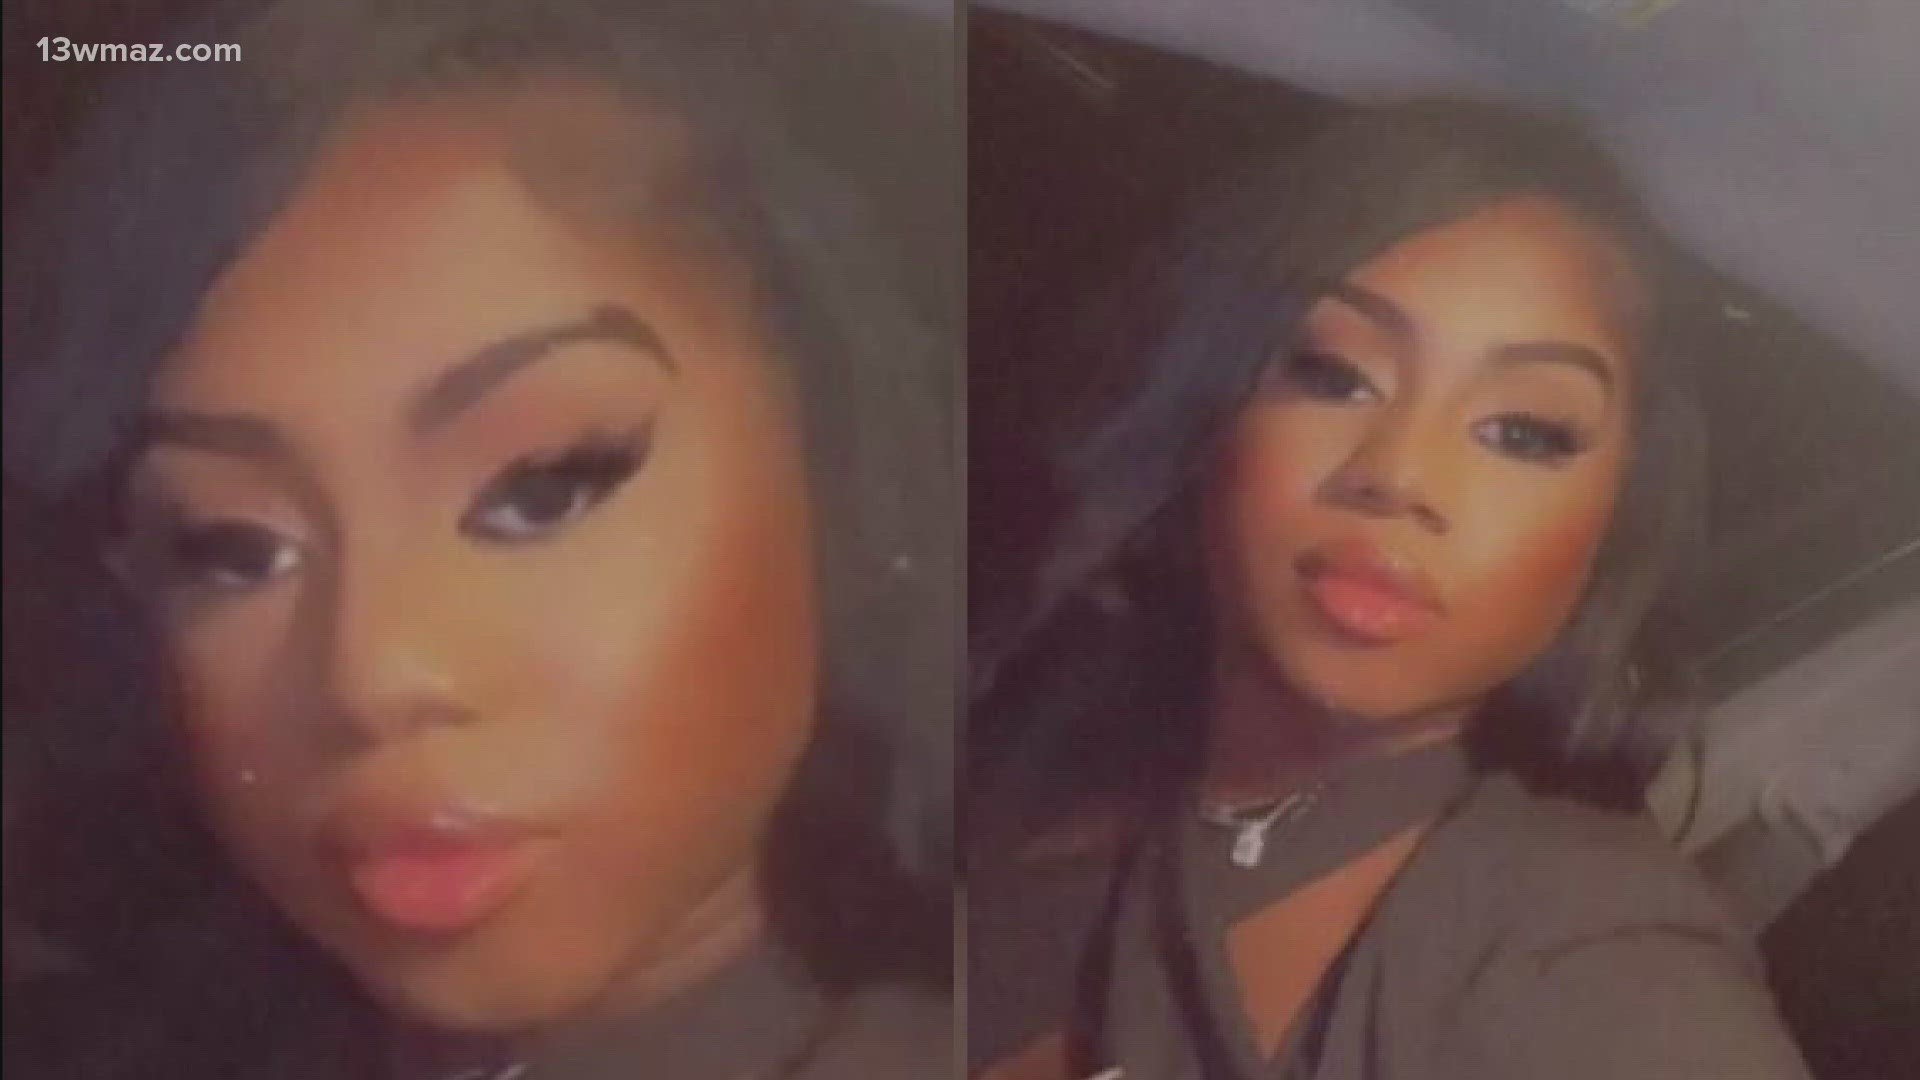 Destin Howard is a transgender woman. She was found murdered in a West Macon parking lot on Dec. 2022. Her mom says her house is quieter without her.